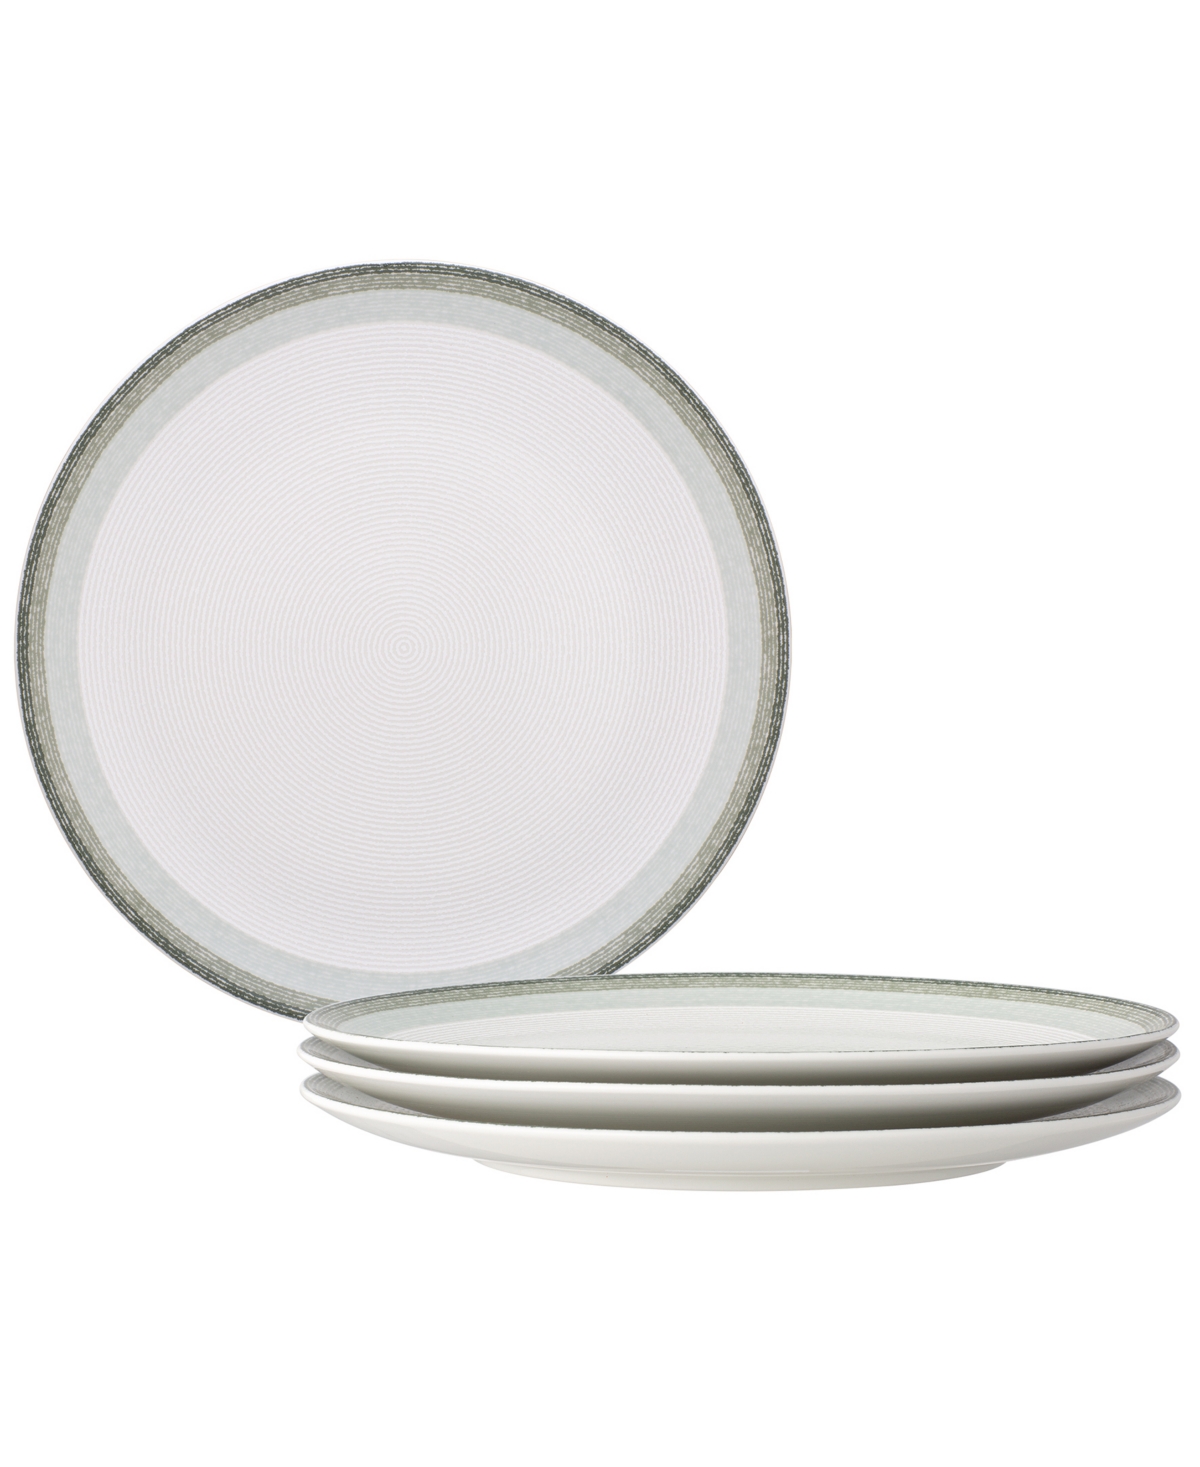 Colorscapes Layers Coupe Dinner Plate Set/4, 11" - Navy